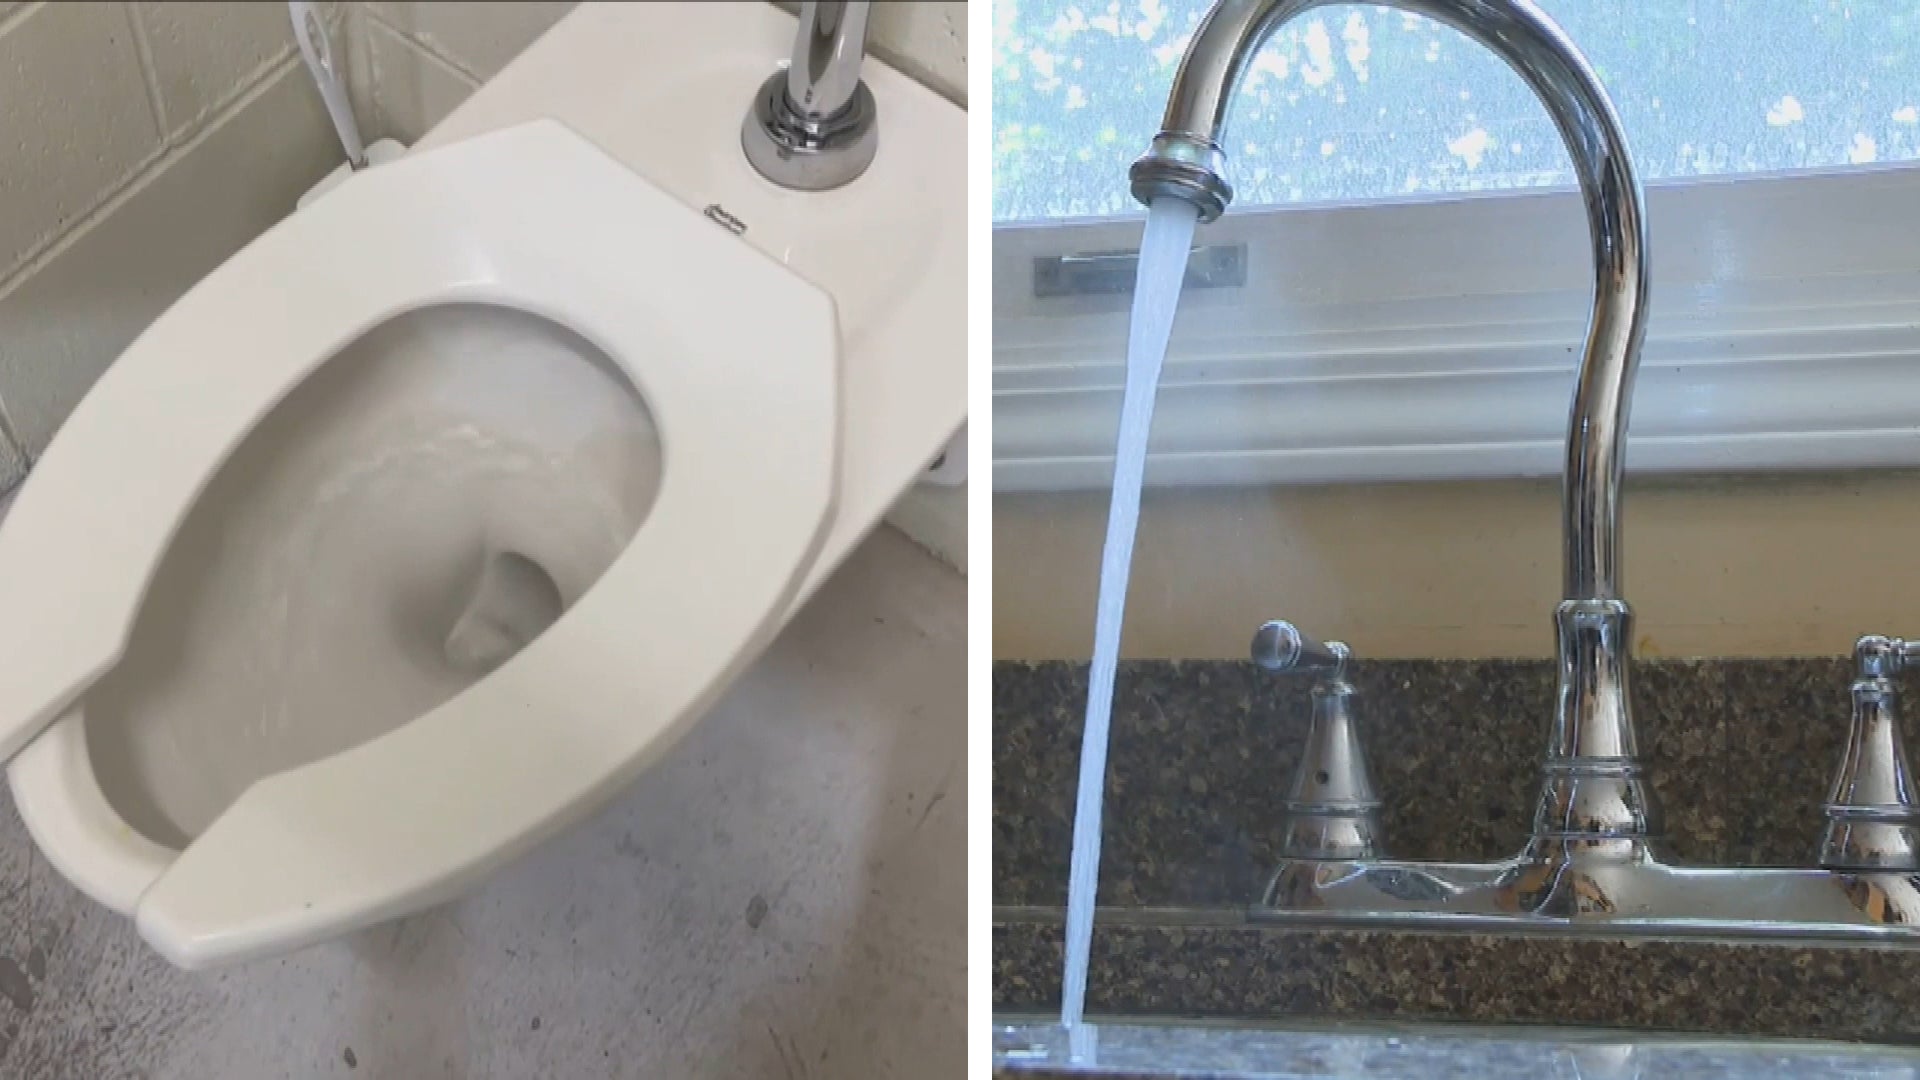 Millions of gallons of wastewater are purified from 'toilet to tap' and recycled as drinking water in Orange County, California.